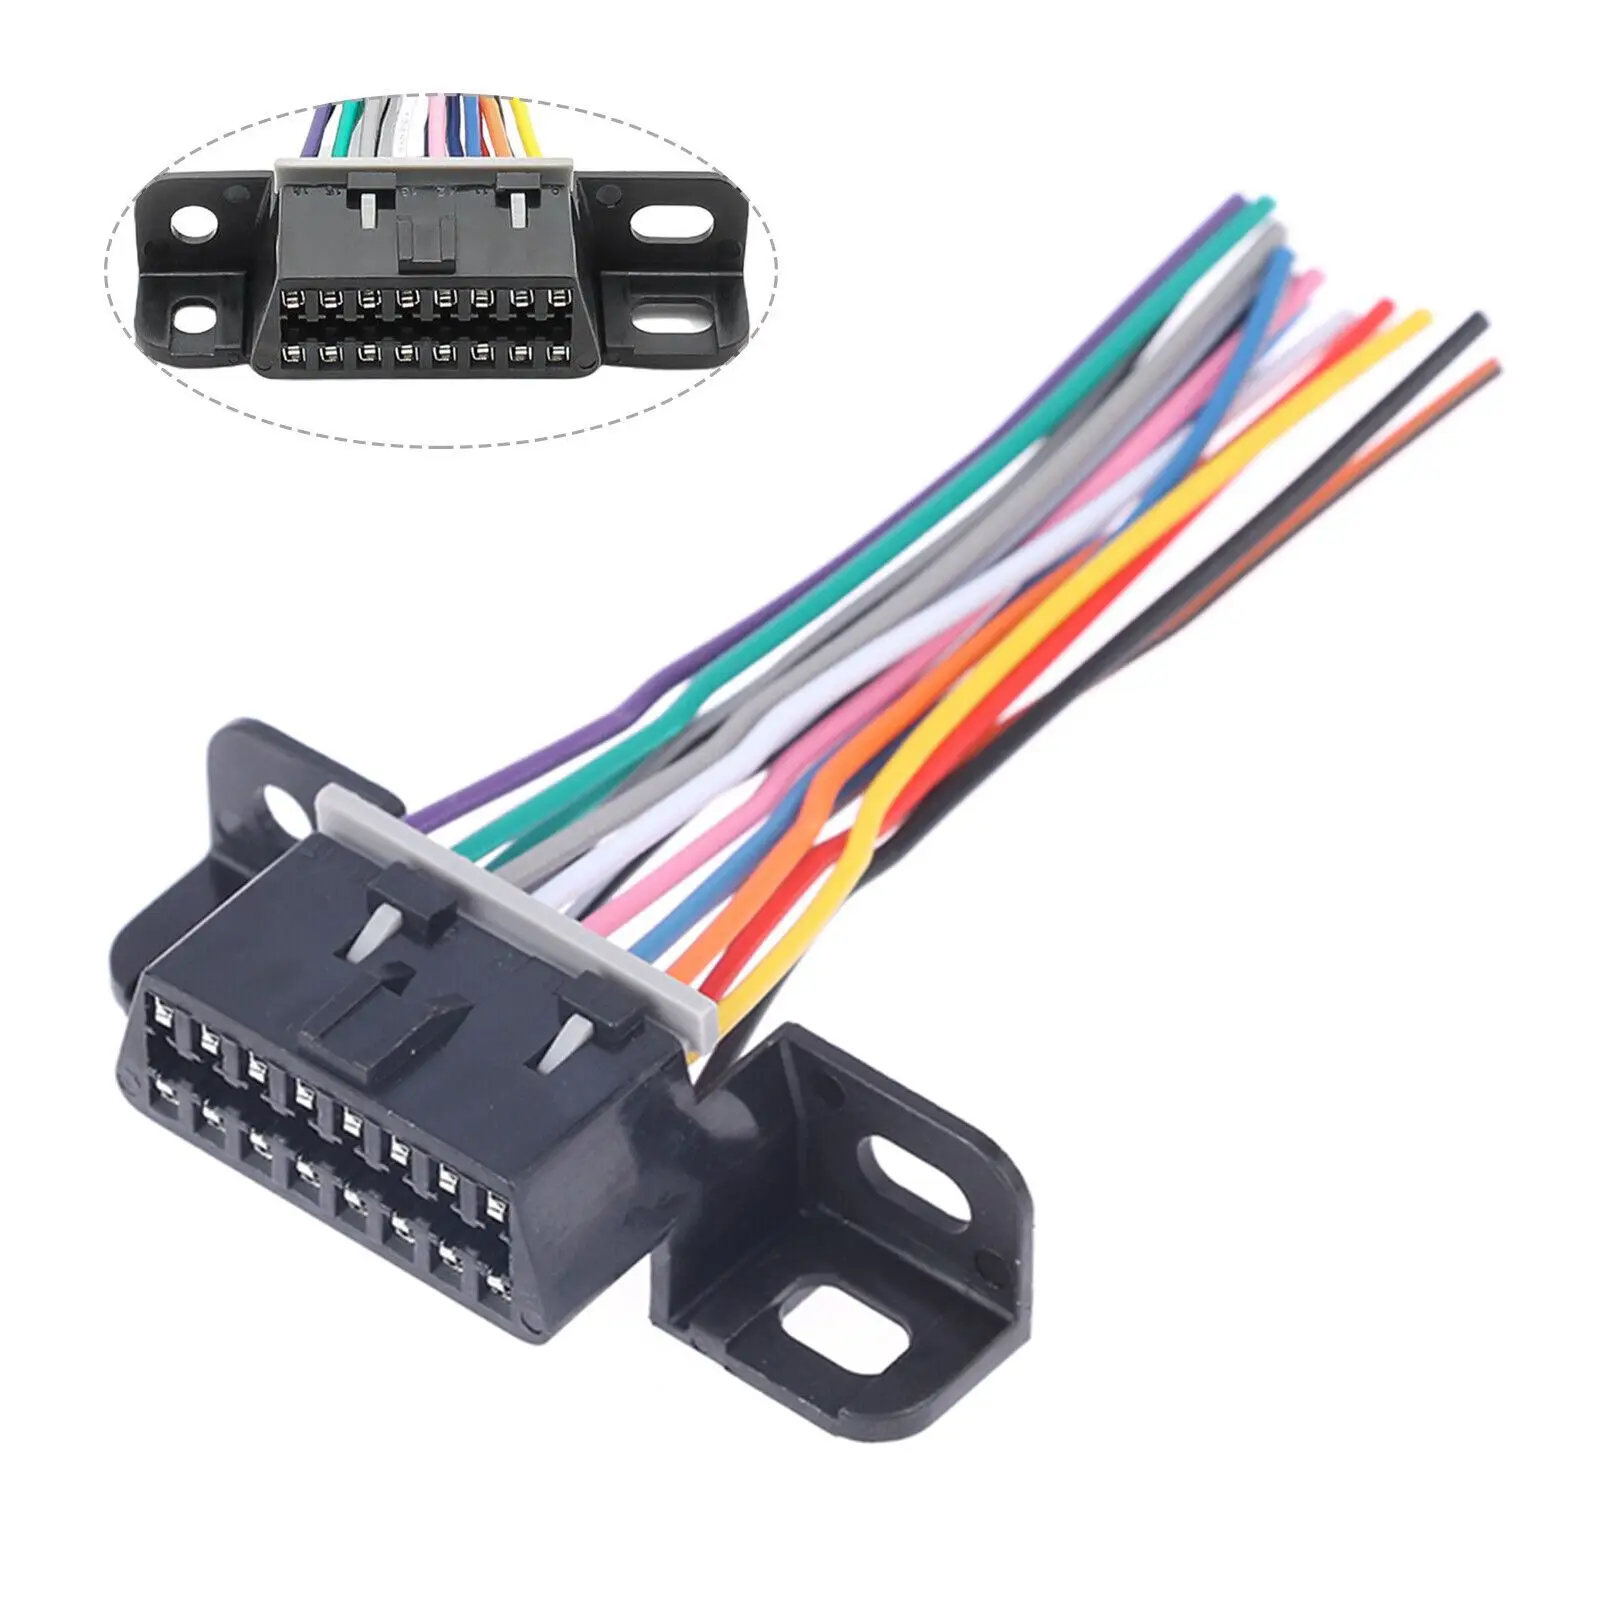 

Assemble Open Obd Harness J1962F 18AWG Car Plug 16 Pin Obd2 Cable Female Extension Connector Ribbon Interface Adapter